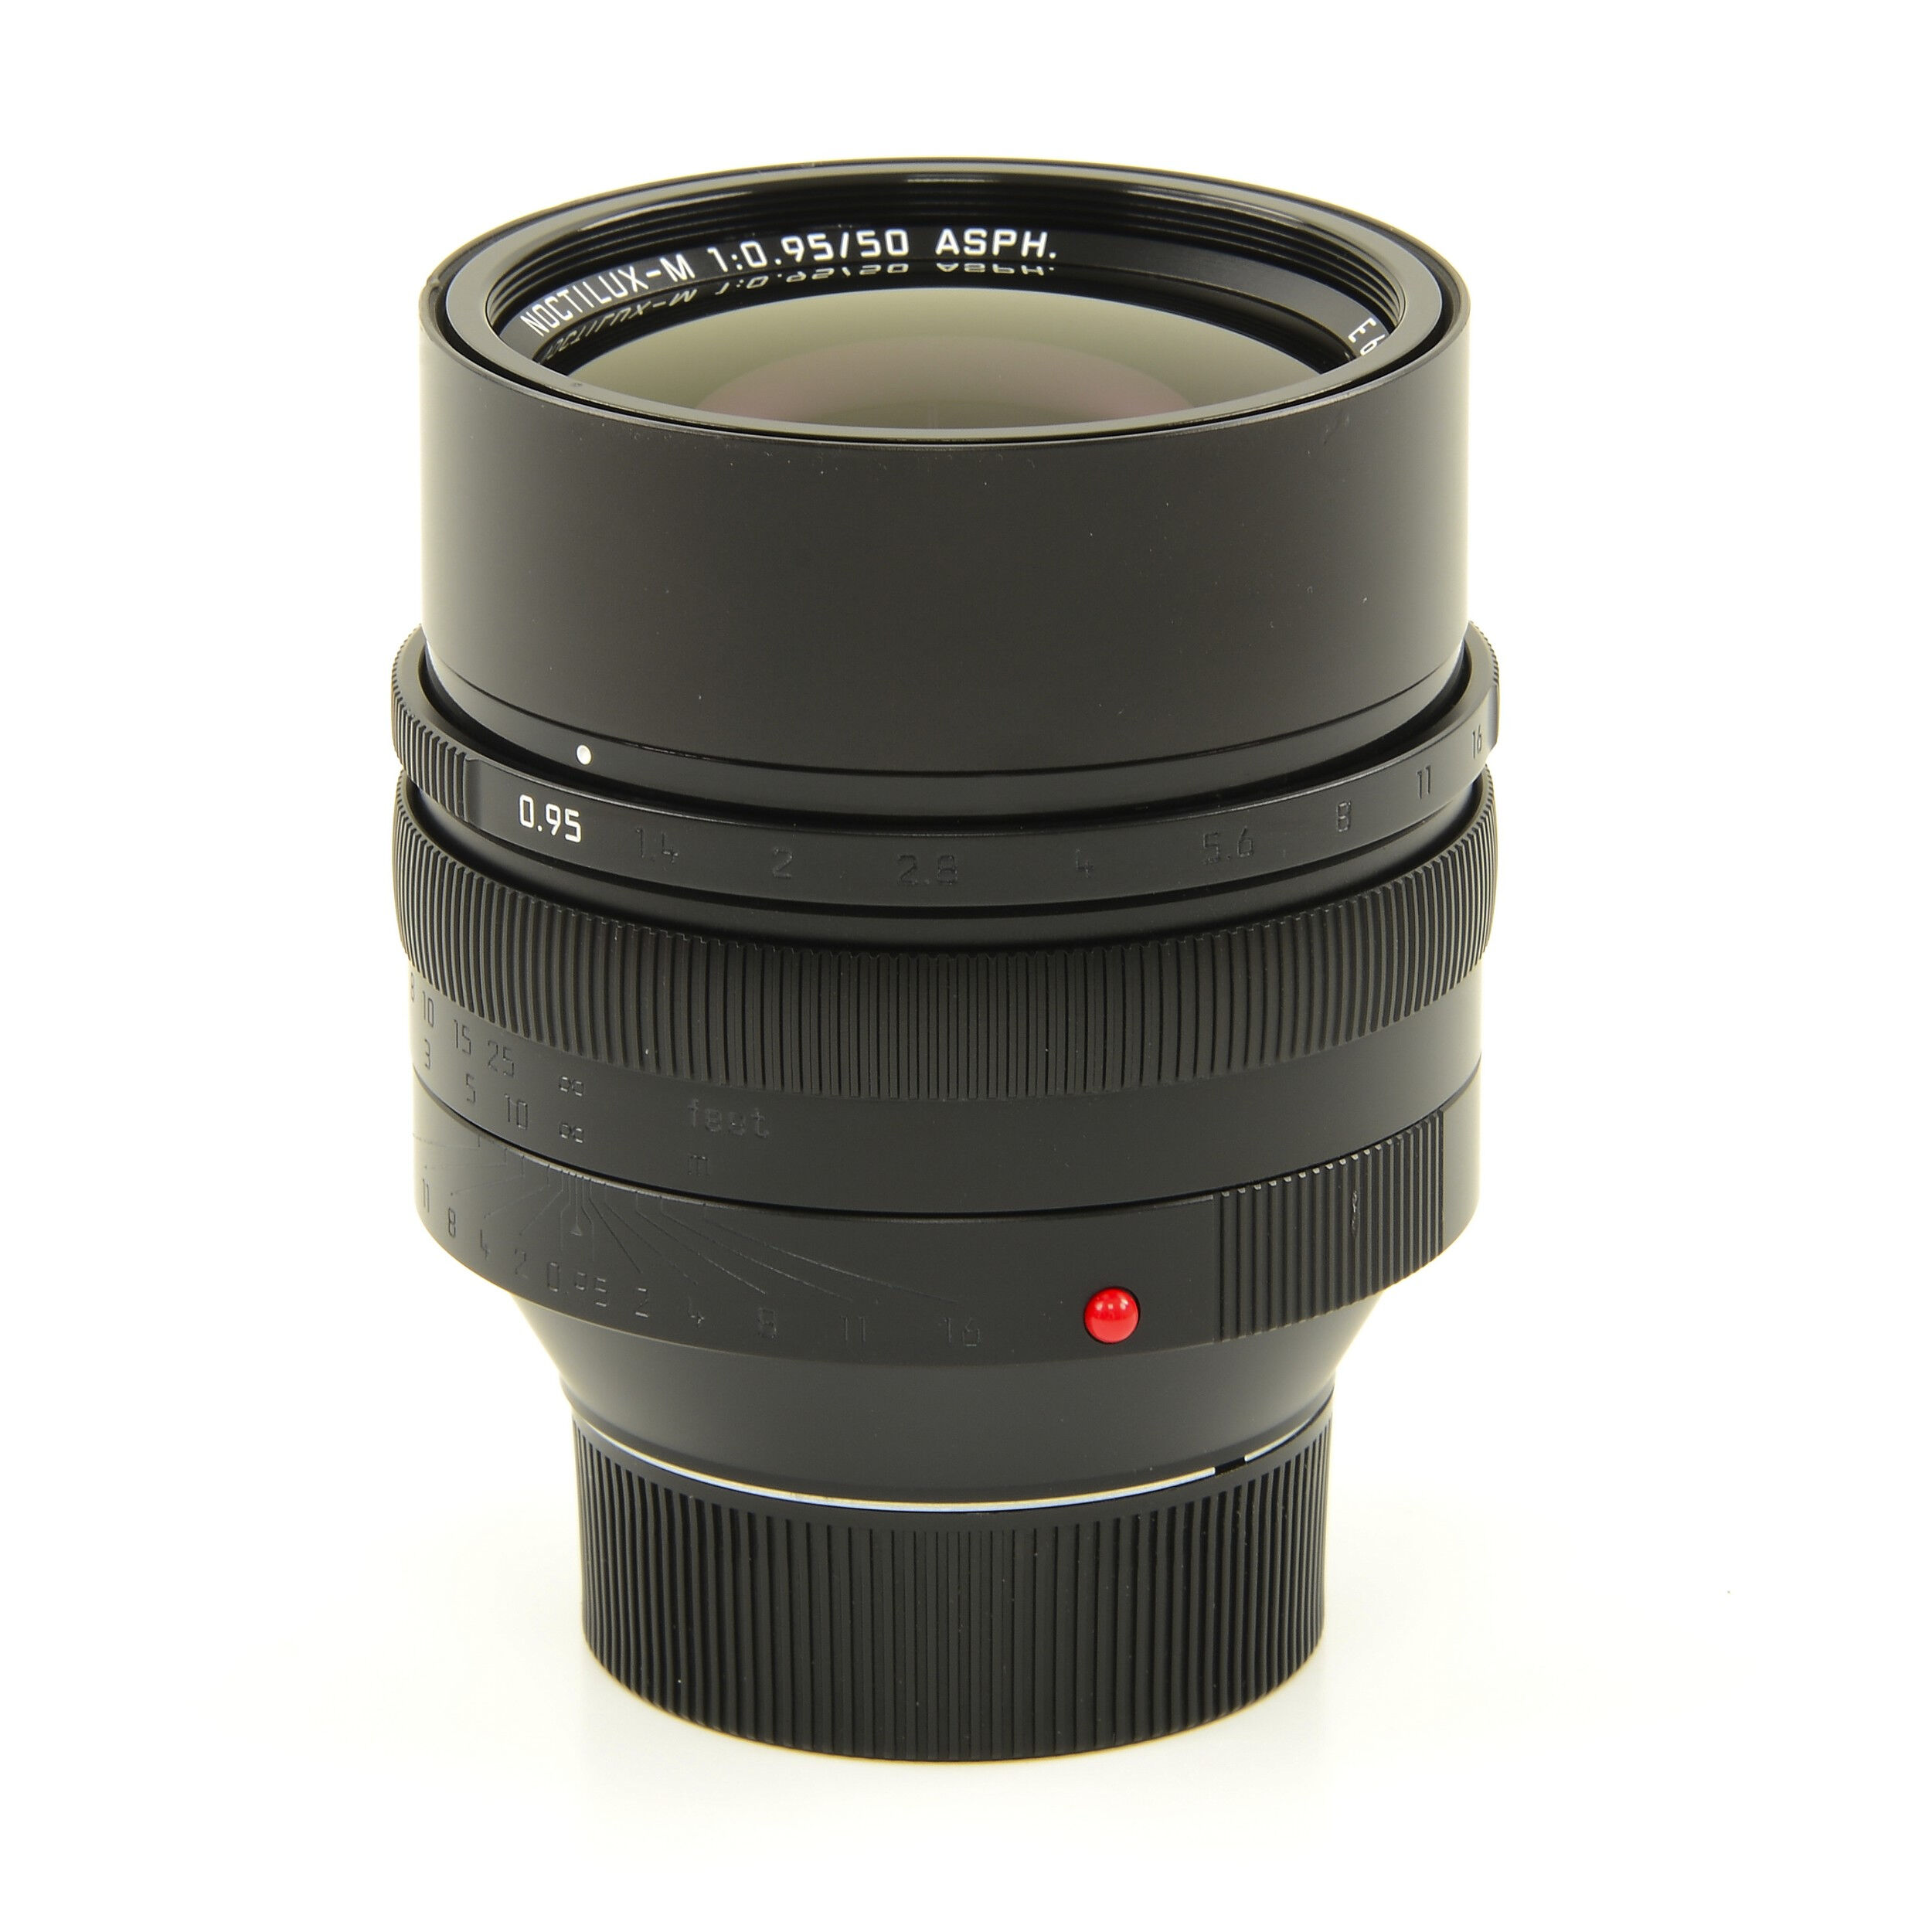 LEICA 50MM F0.95 NOCTILUX-M ASPH EDITION 0.95 DUPONT DUMMY / DISPLAY LENS READ!!